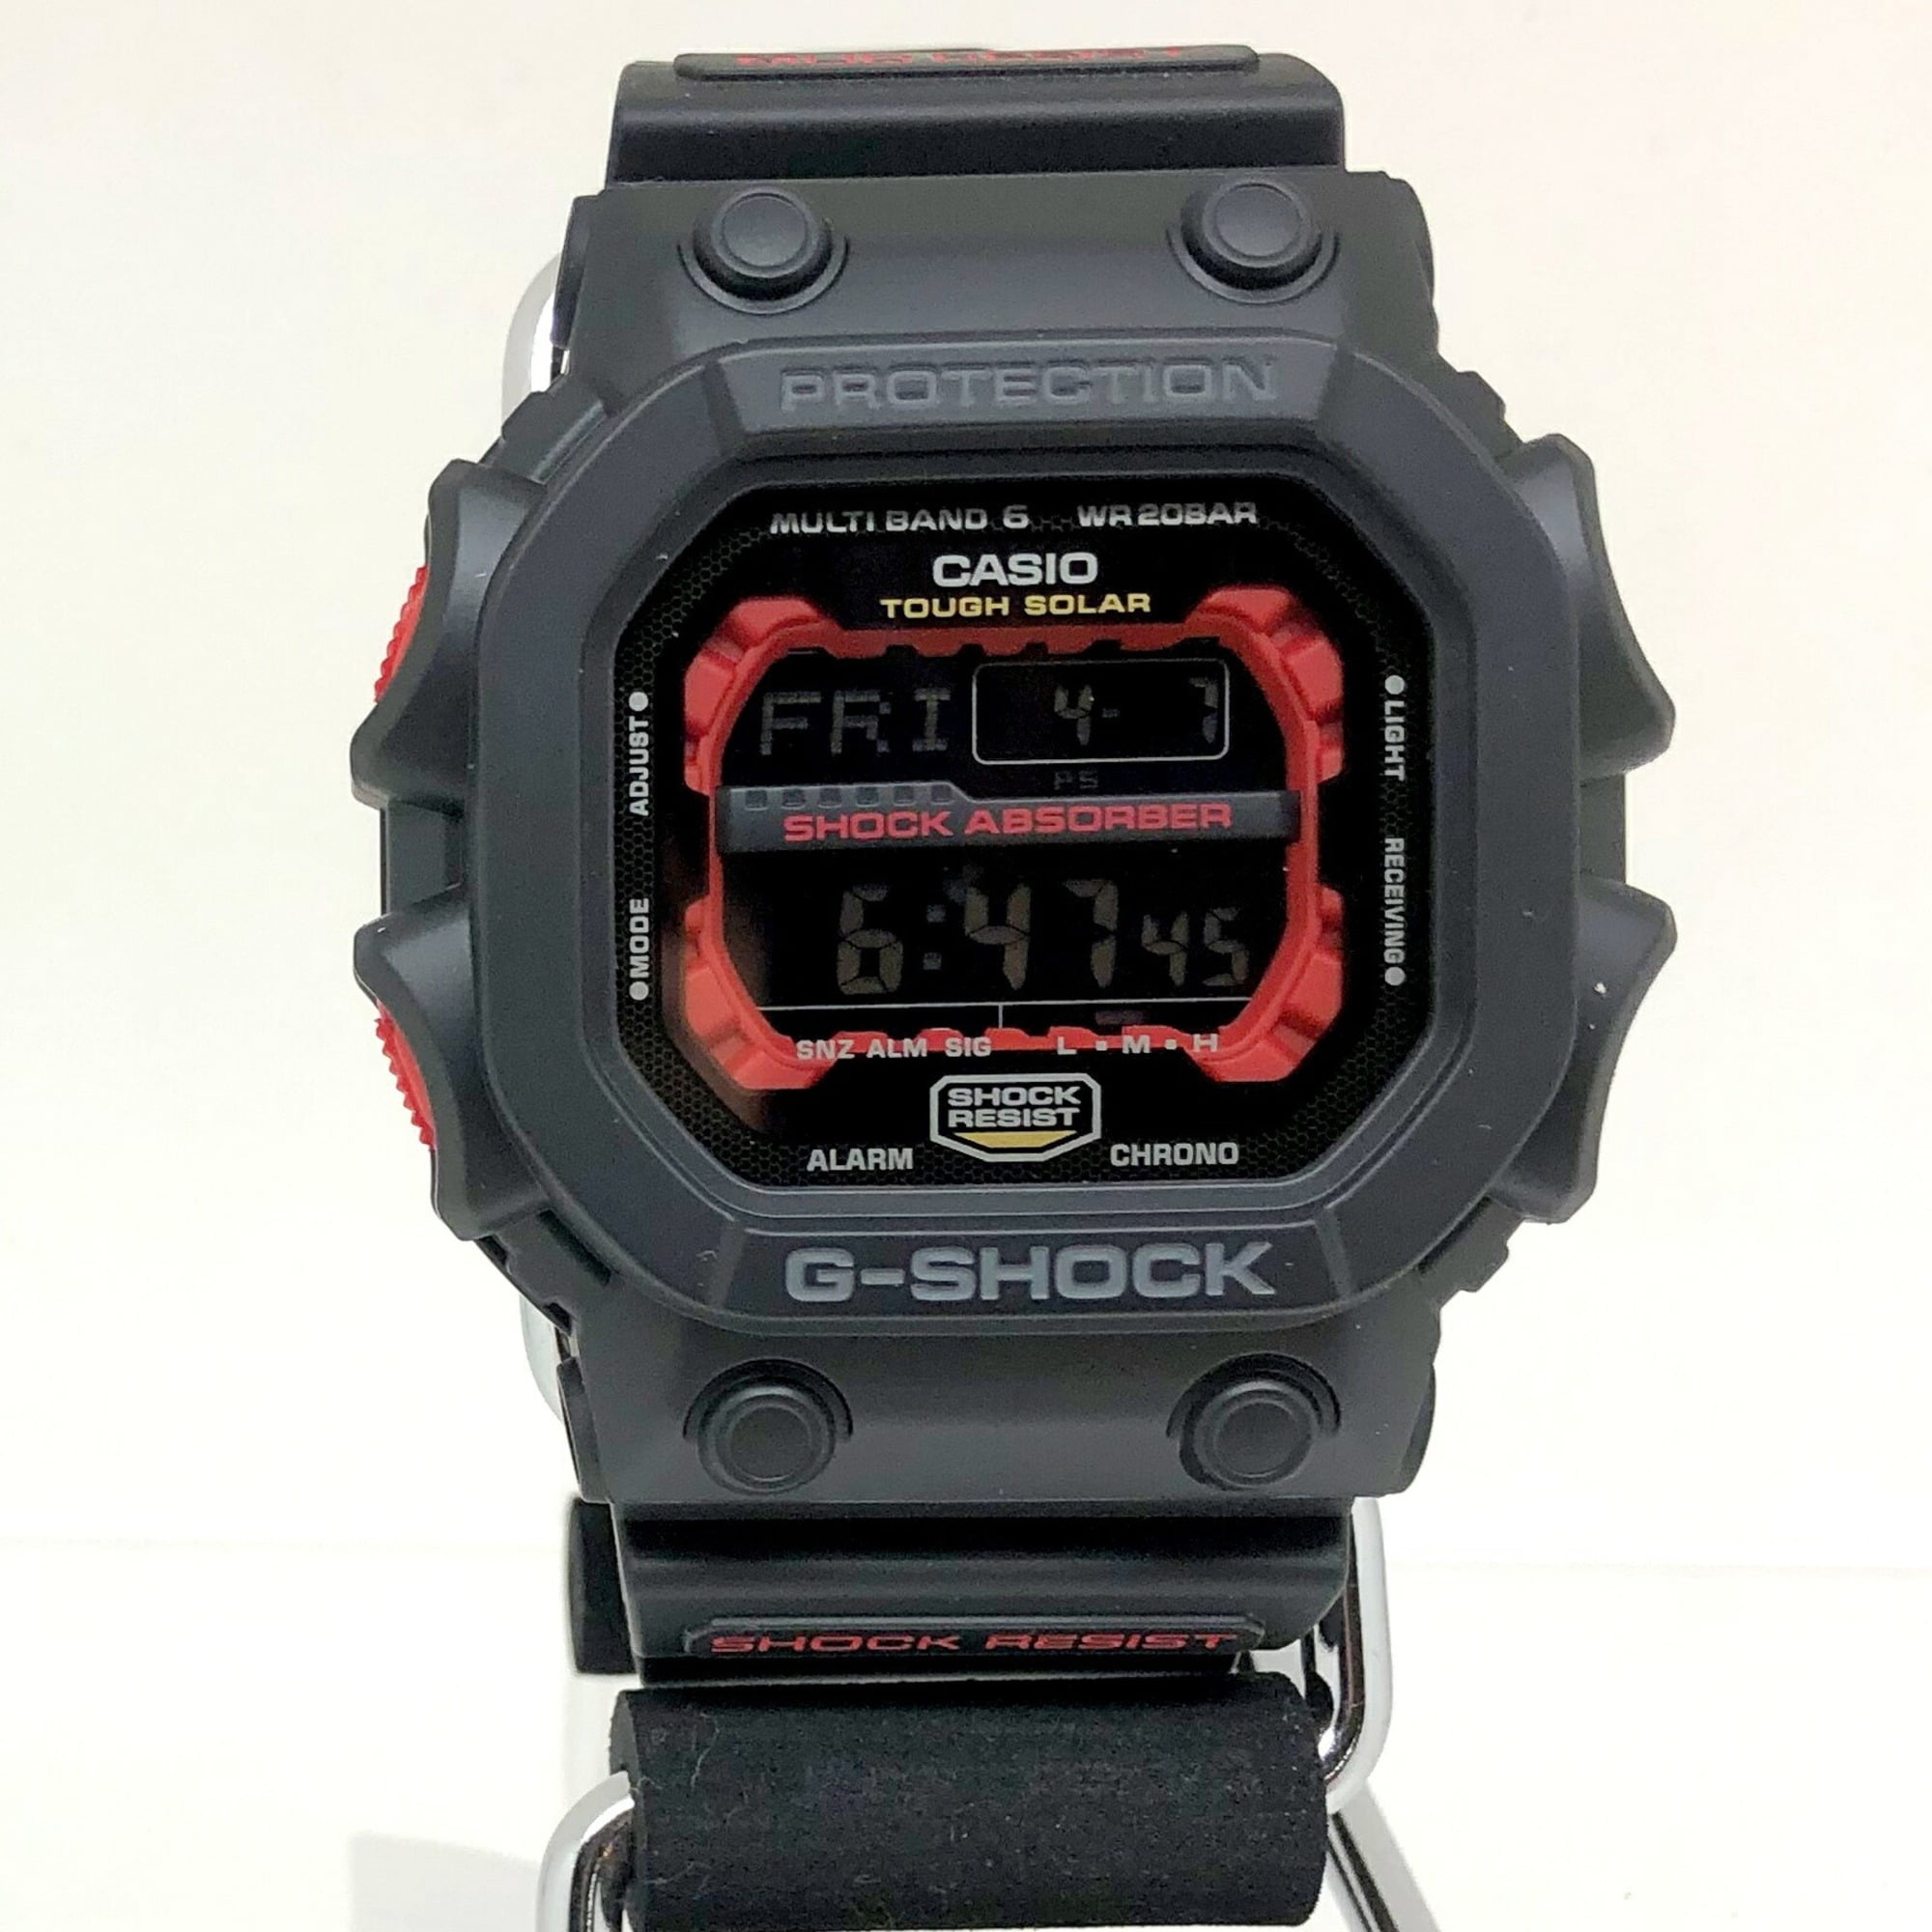 maling Airfield Reporter Authenticated Used G-SHOCK G shock CASIO Casio watch GXW-56-1A big case  face square digital tough solar electric wave world time GX series black  red men - Walmart.com